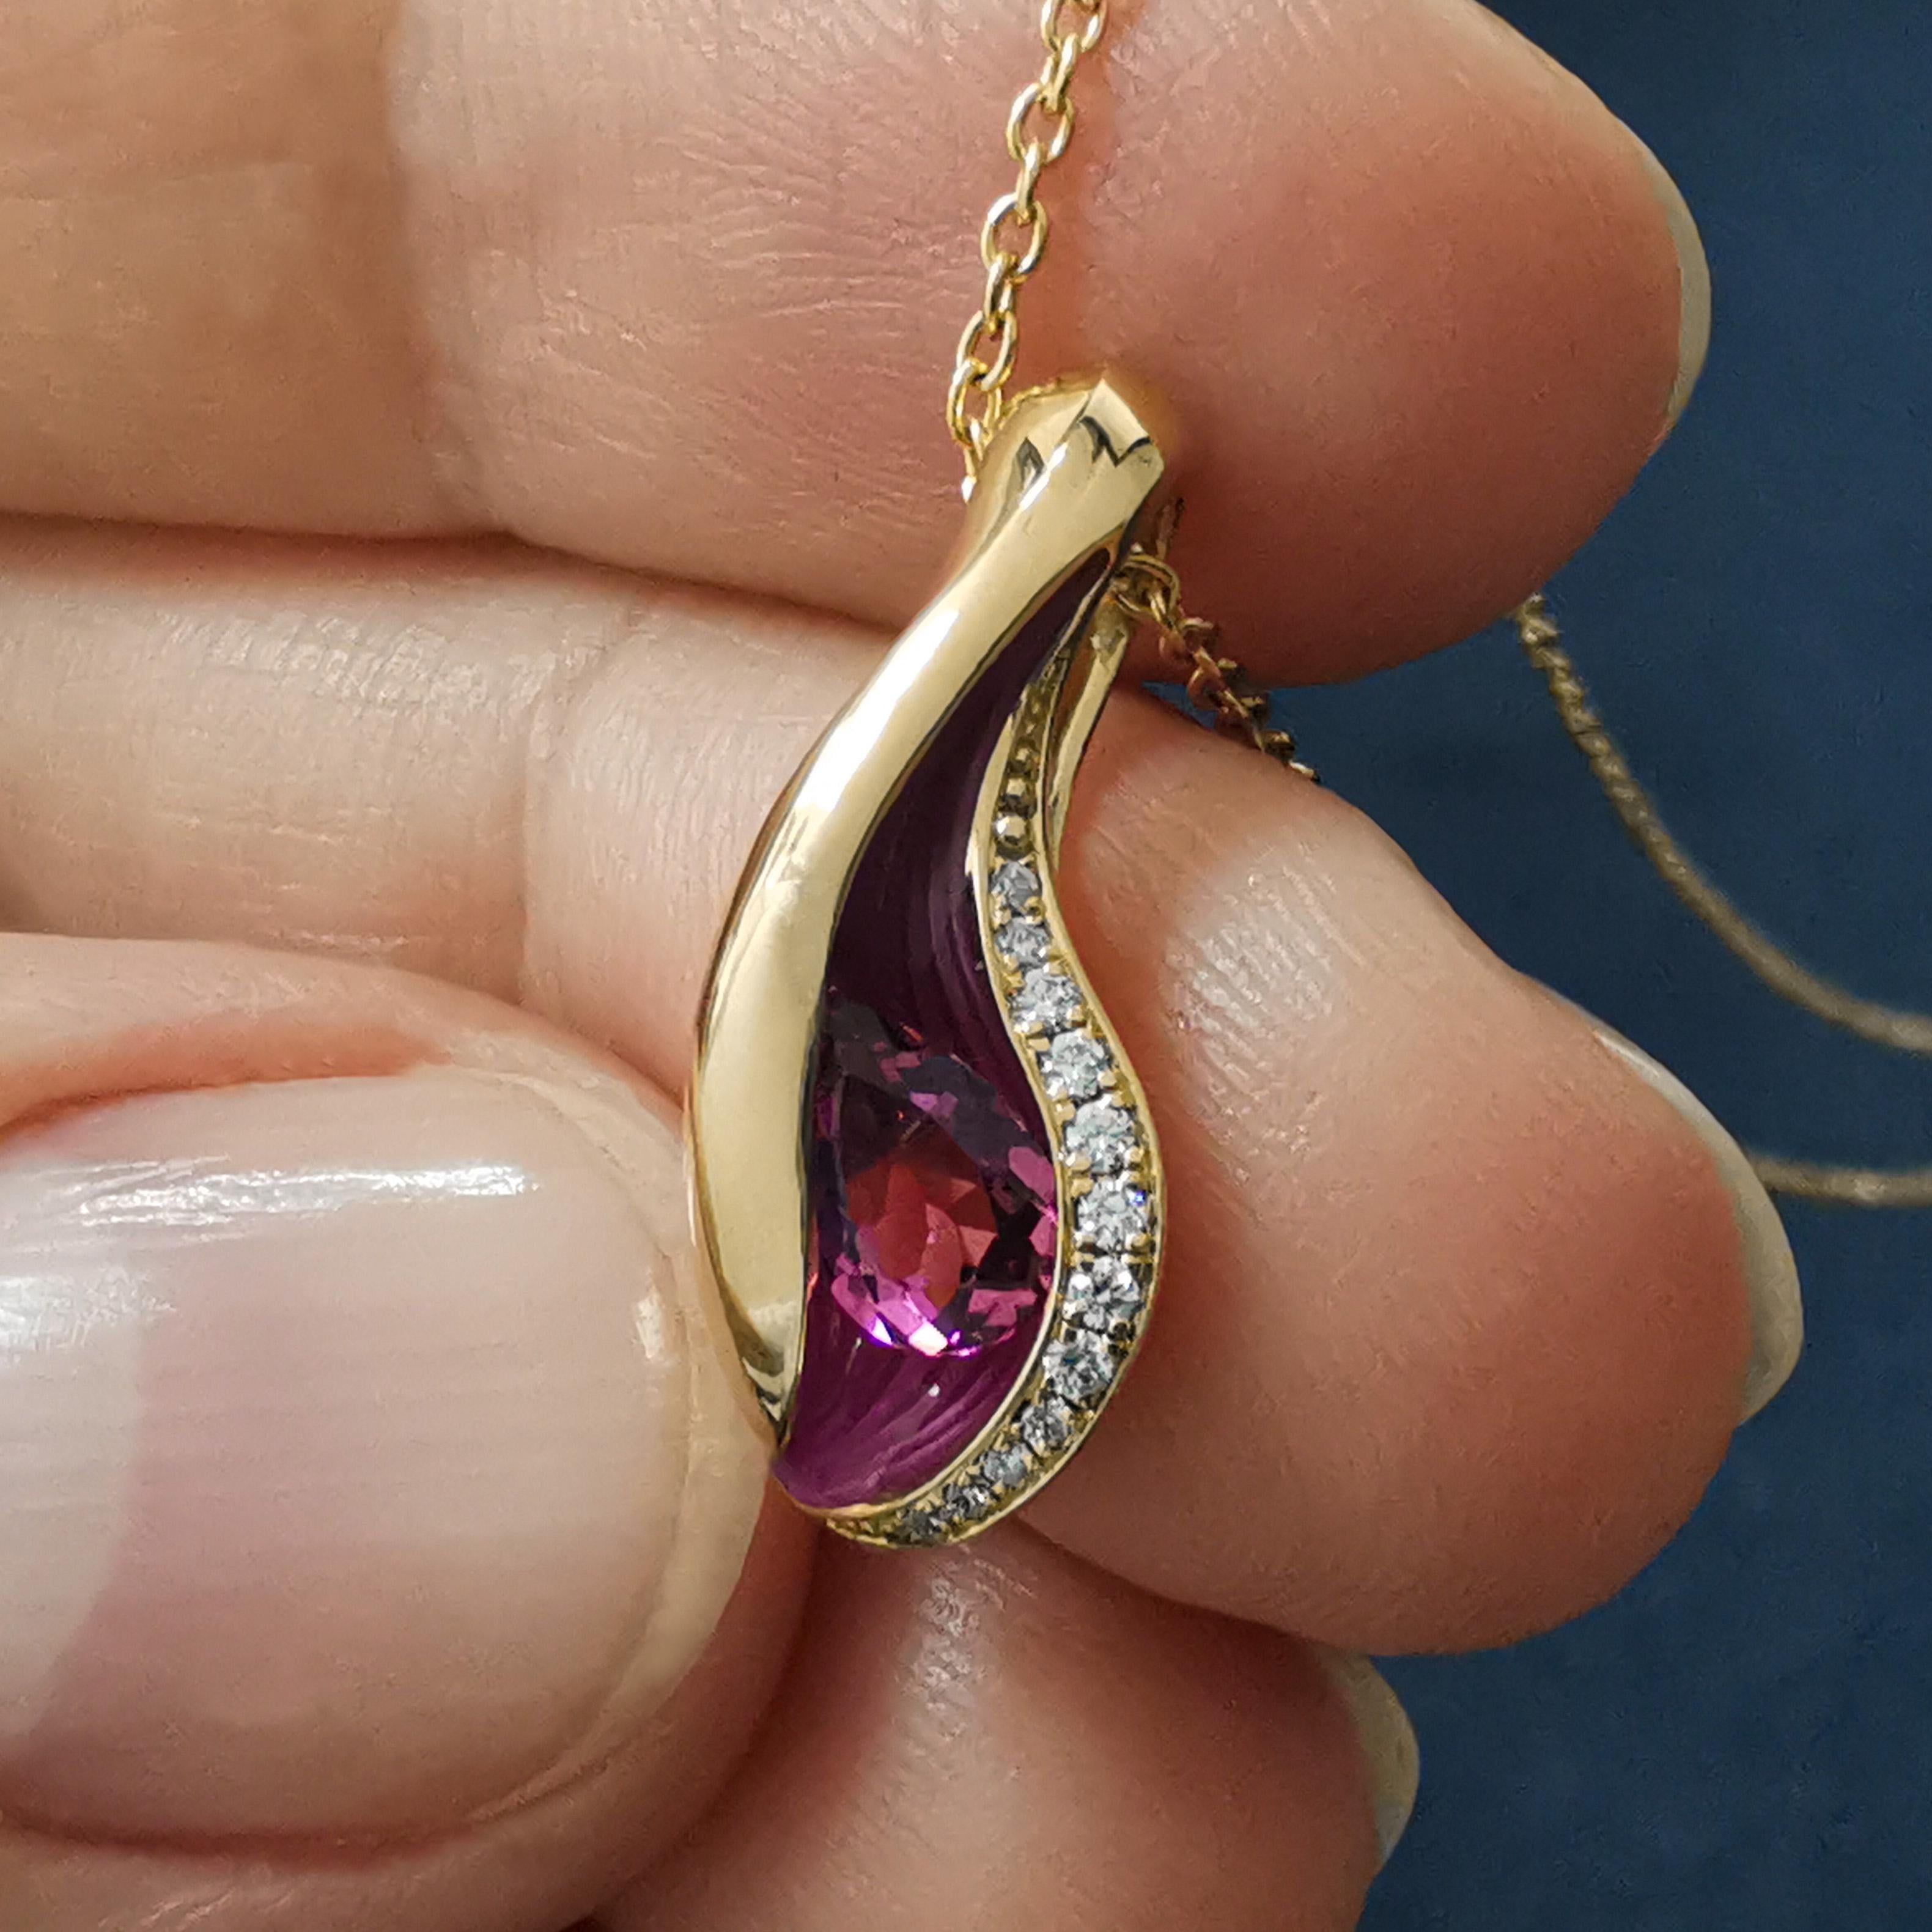 melted gold pendant